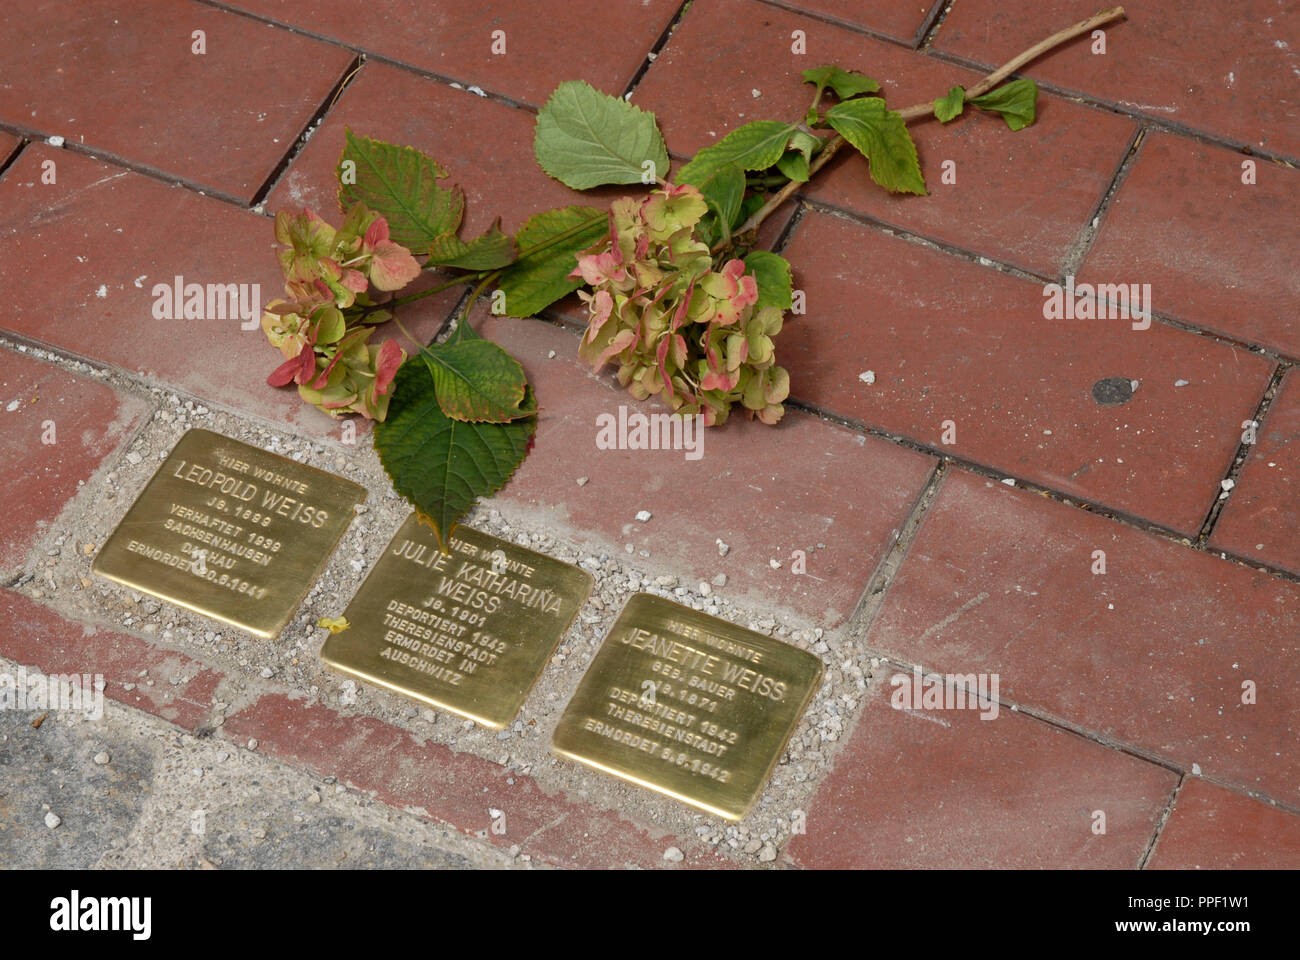 Stumbling blocks in memoriam of Leopold, Julie Katharina and Jeanette Weiss in the Viktor-Scheffel-Strasse in Munich, Germany. Stolpersteine are small, cobblestone-sized brass memorials for the victims of National Socialism. Stock Photo